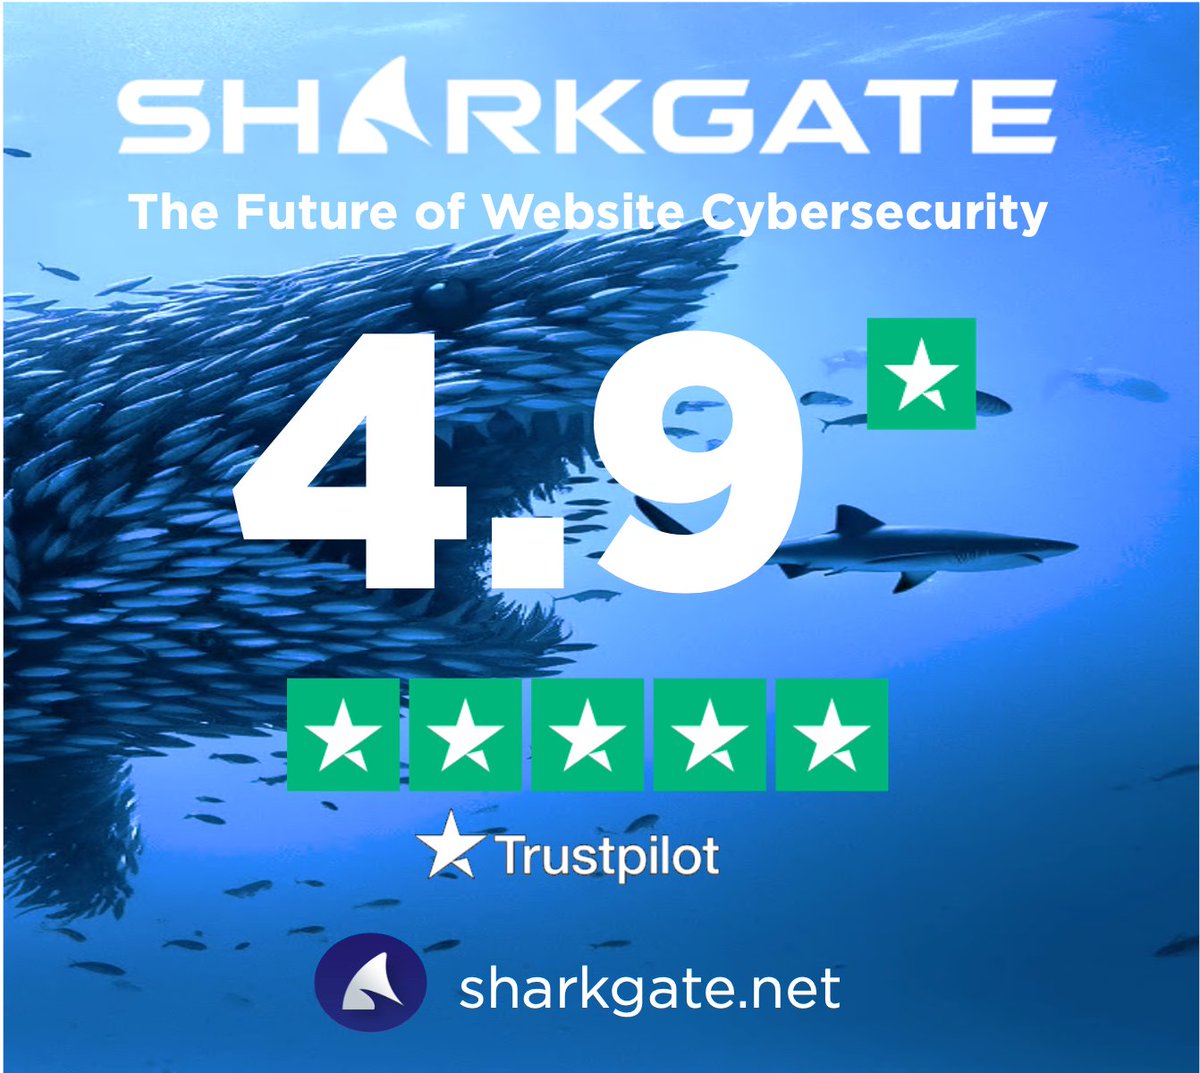 Our AI-powered website protection is adaptive and evolves, stopping hacker attacks in their tracks. Compared to competitors, our tech is simply the best. Our clients think so too... They score us 4.9/5* on Trust Pilot - proof is in the pudding! #fightingback #wearesharkgate